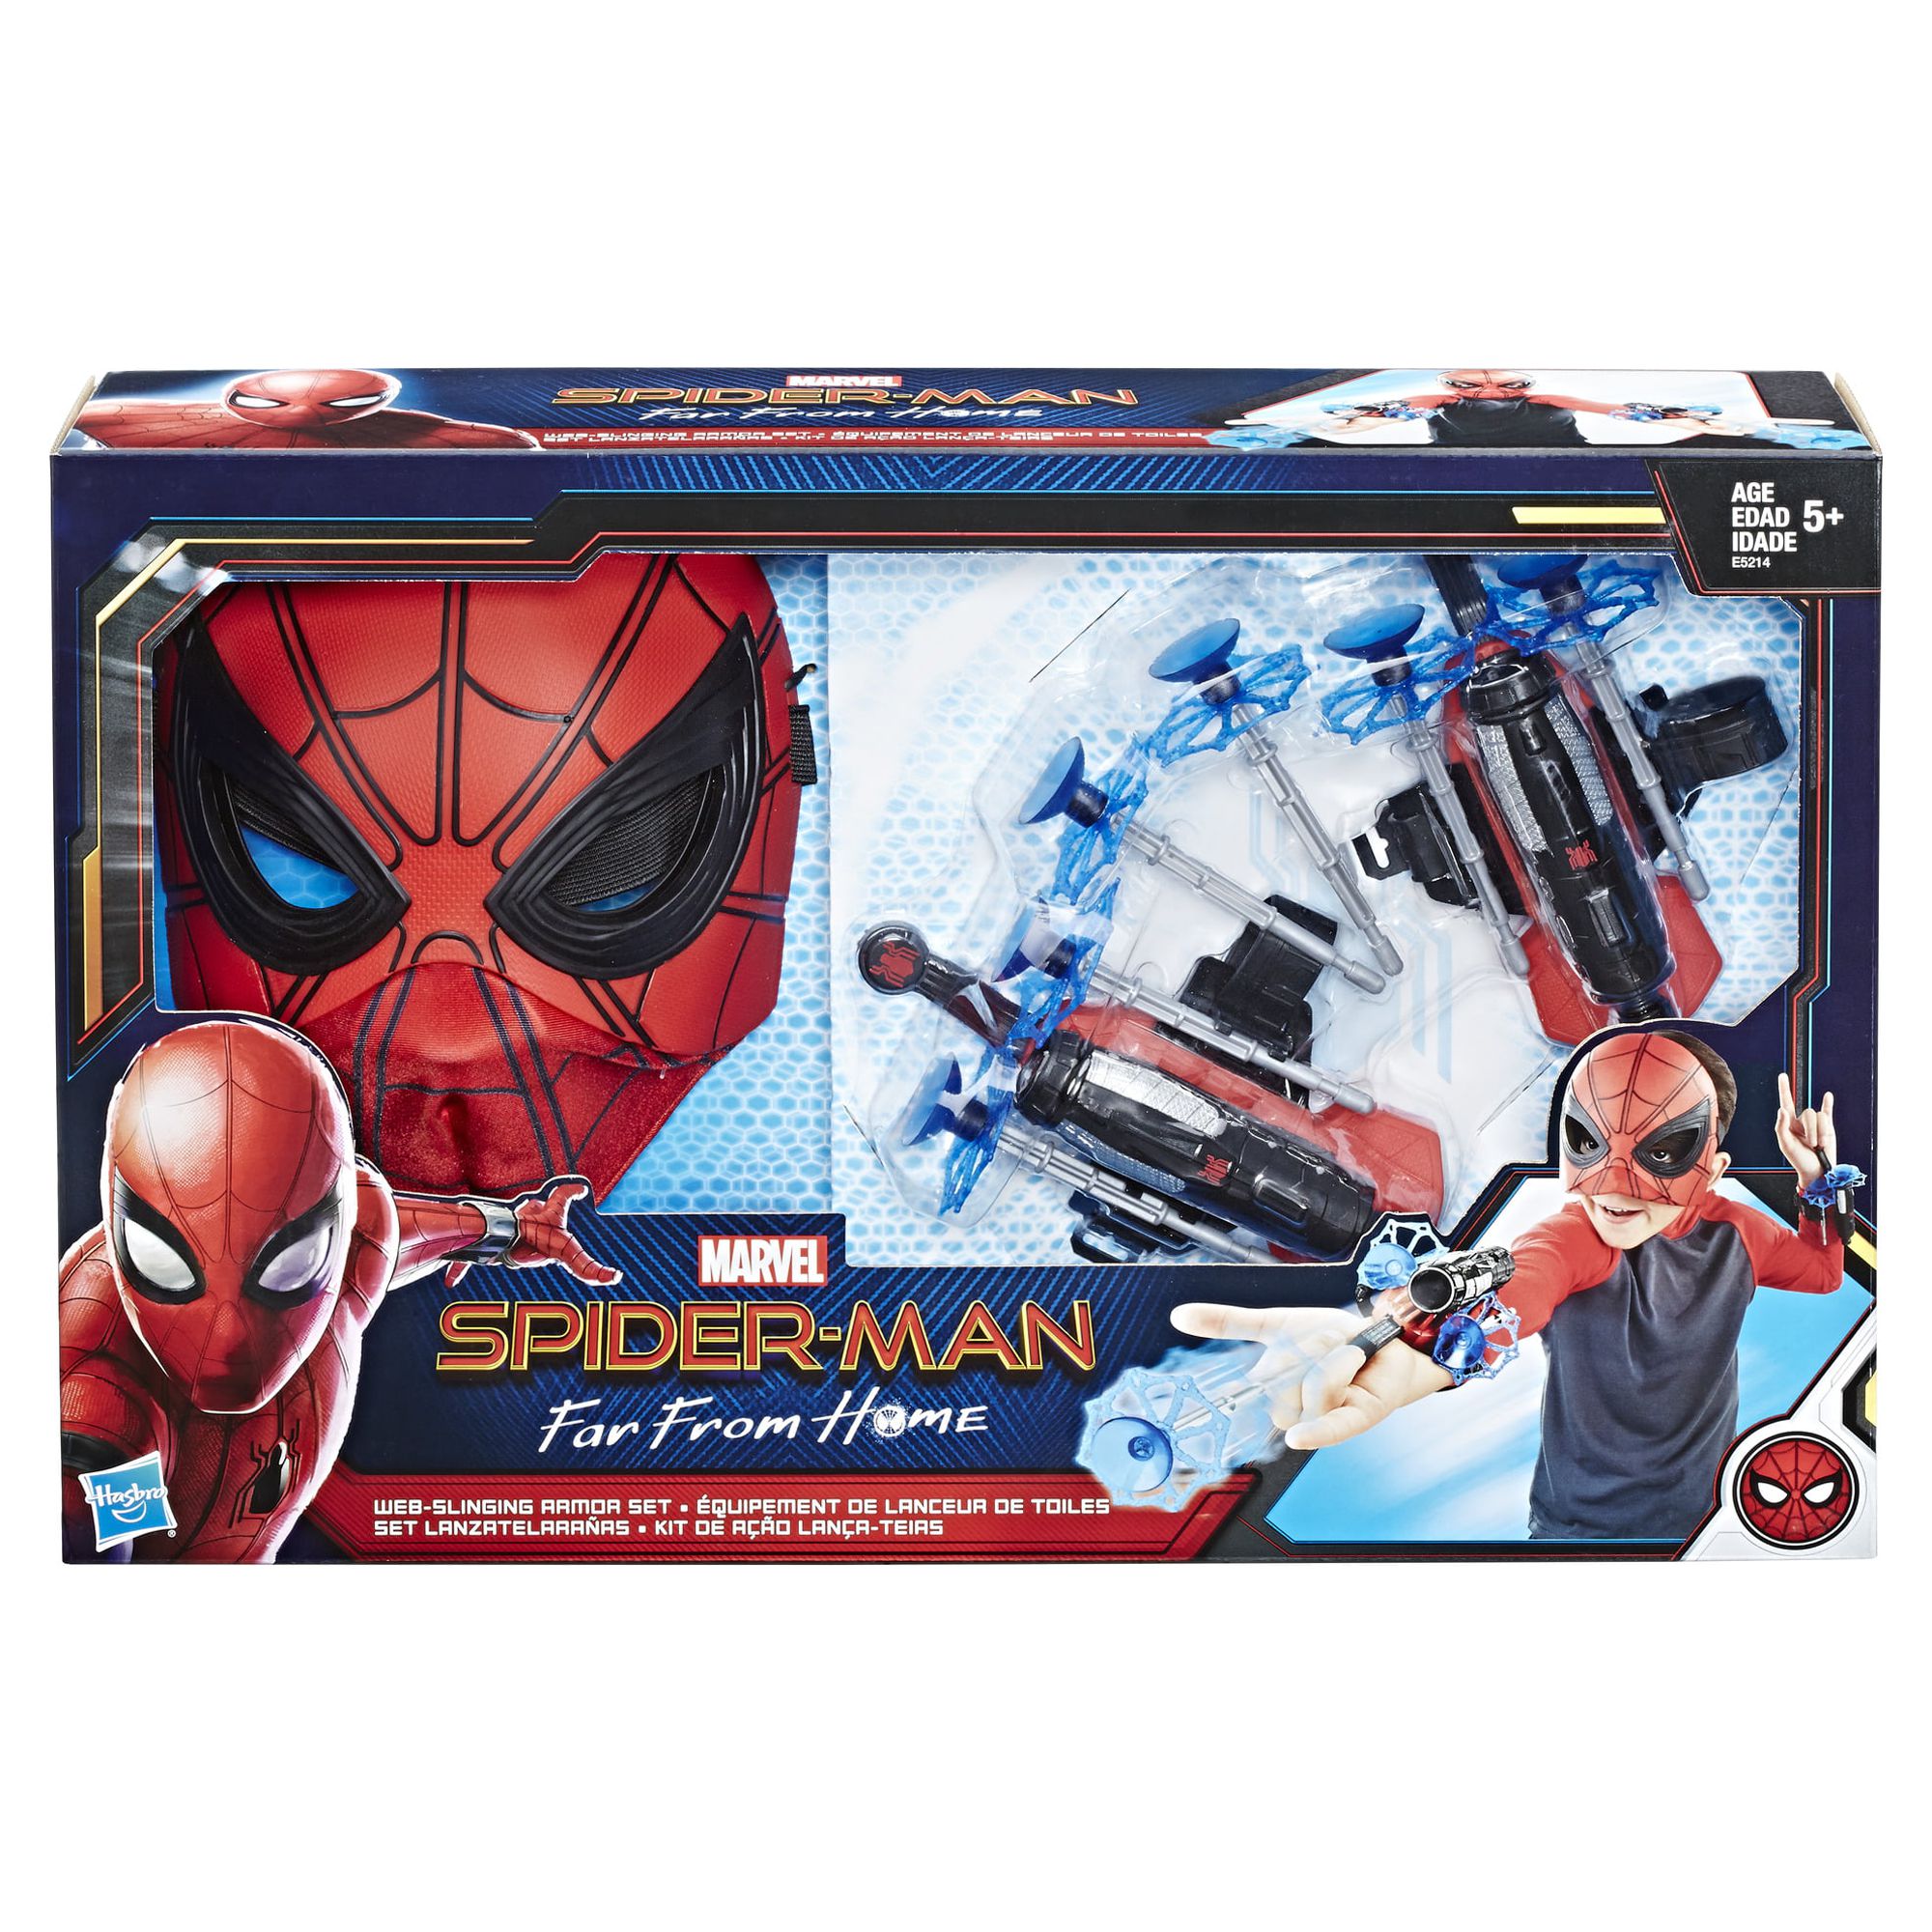 Marvel: Spiderman Far From Home Web Slinging Armor Set Kids Toy Action Figure for Boys and Girls(4”) - image 2 of 11